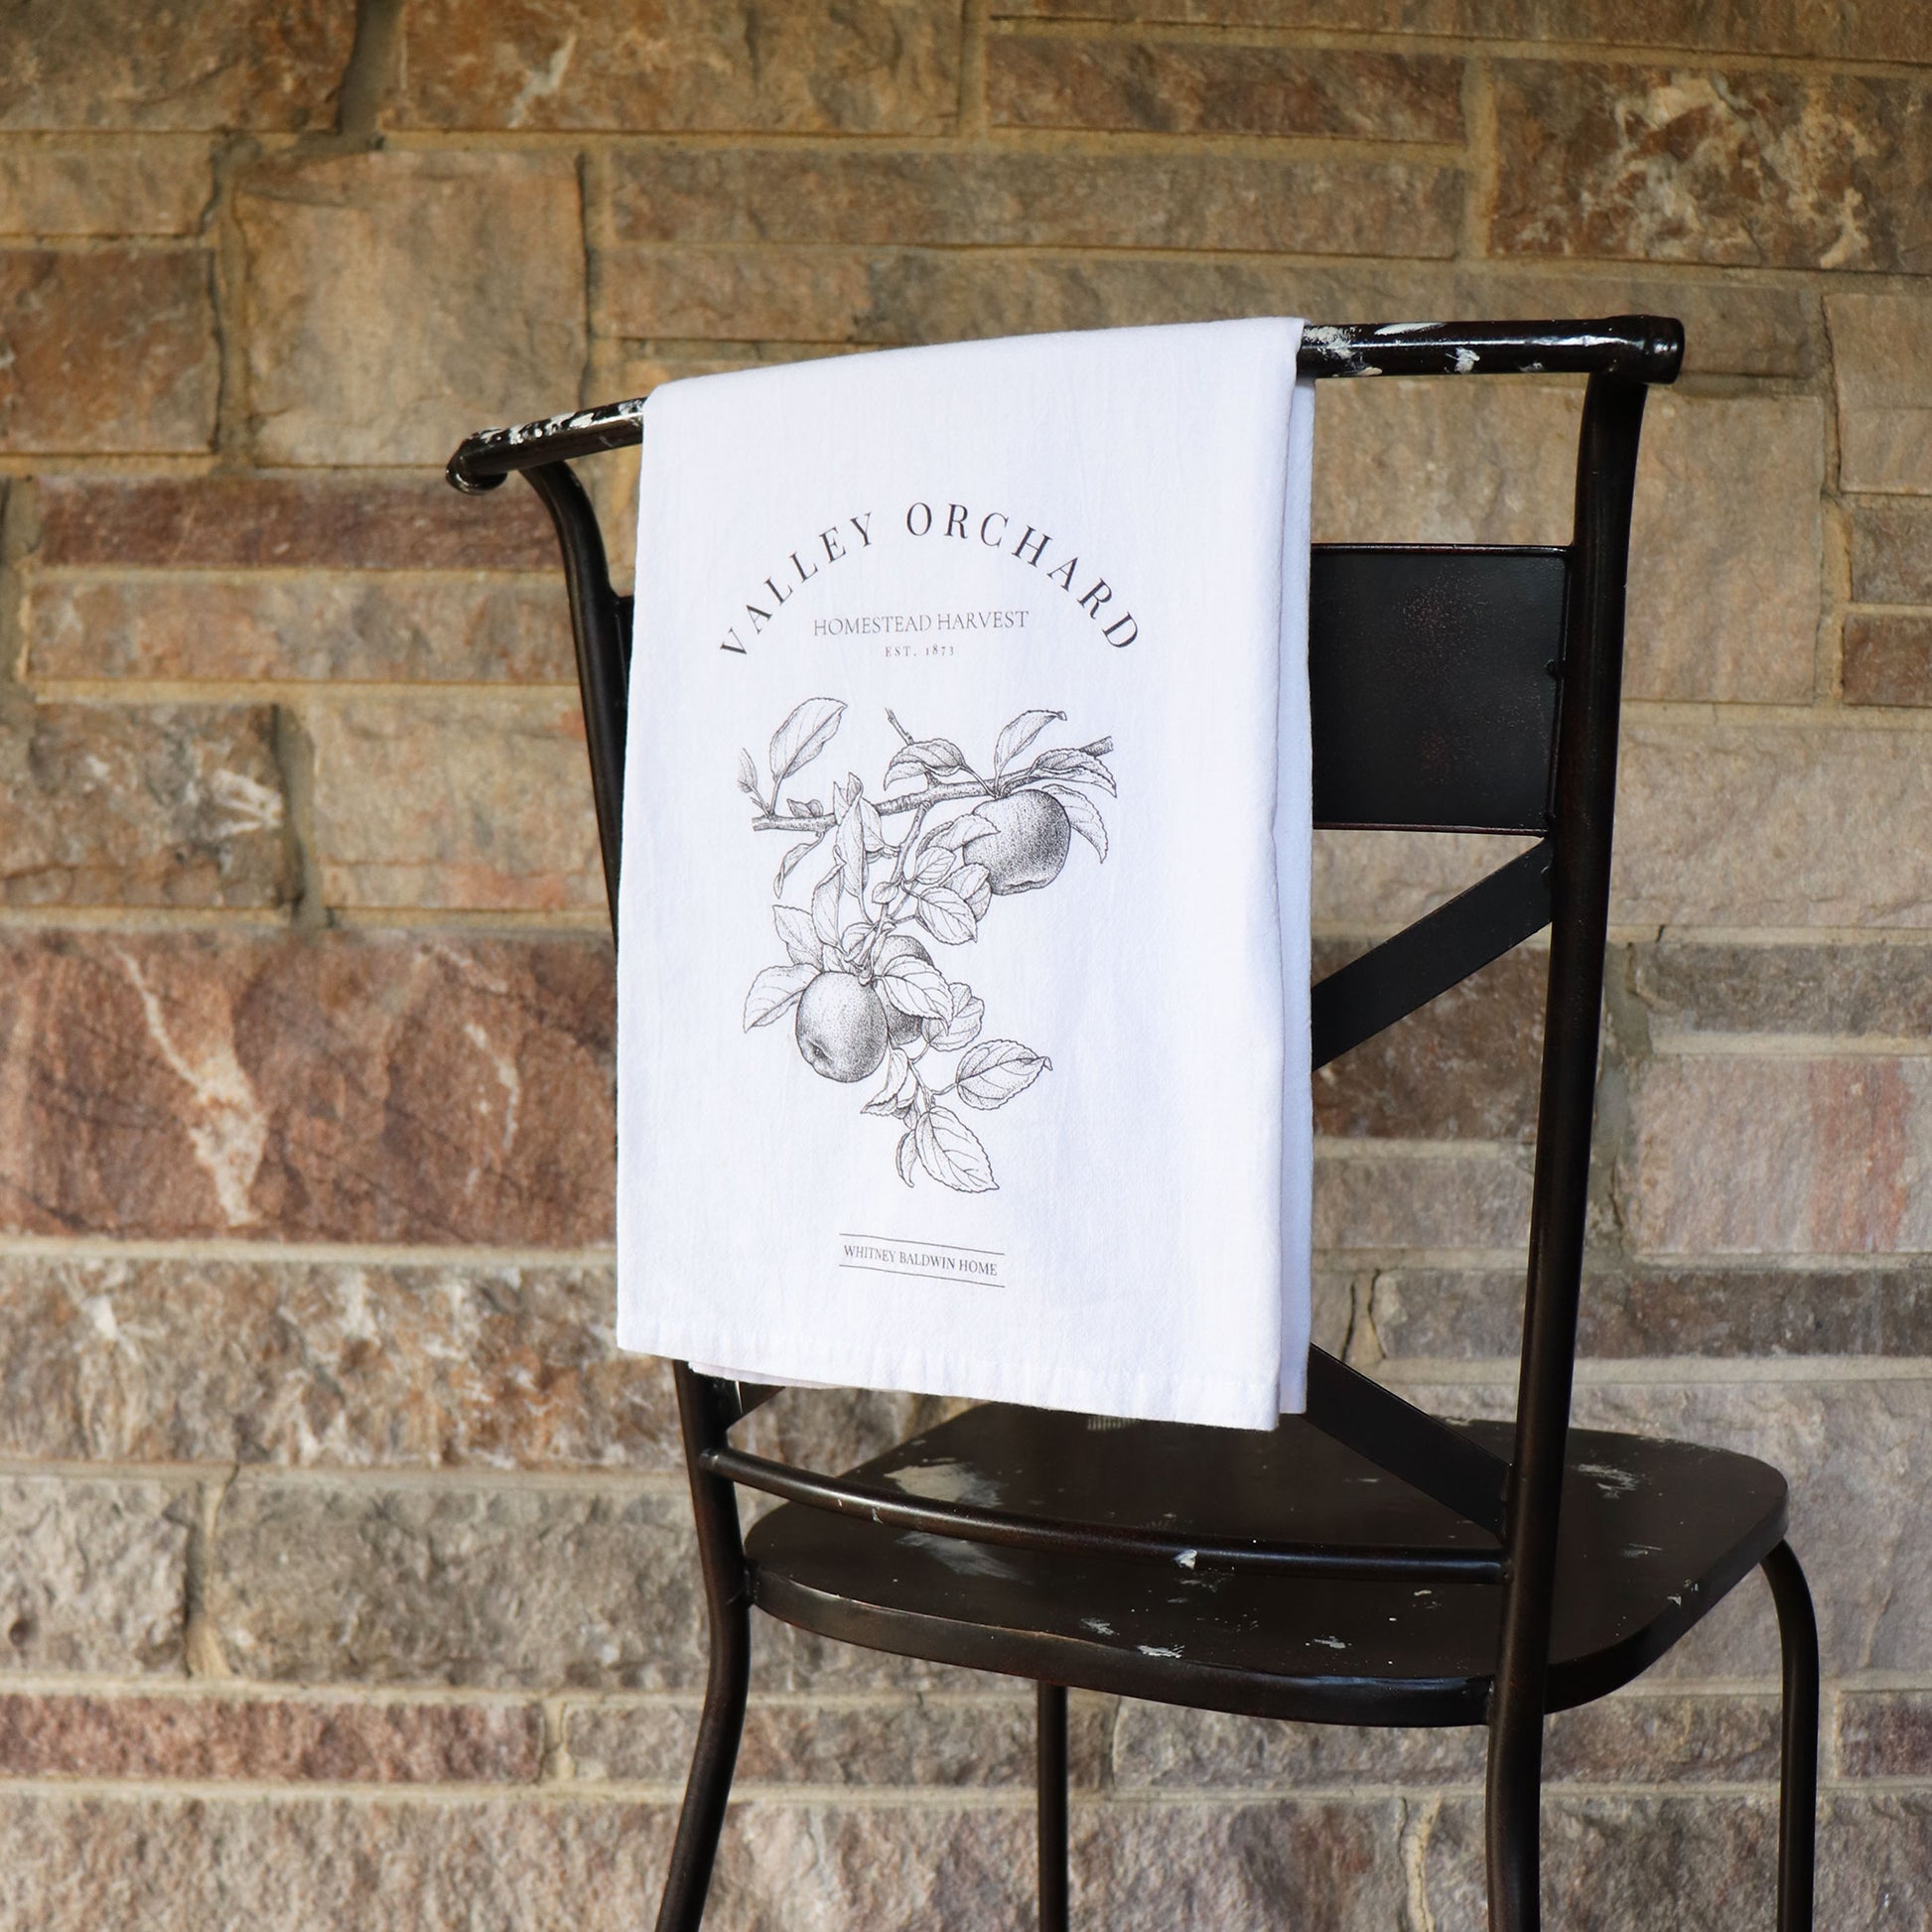 homestead harvest valley orchard apple orchard tea towel. the apple orchard tea towel is hung over the back of a char. The illustration displays a branch with two apples on it.